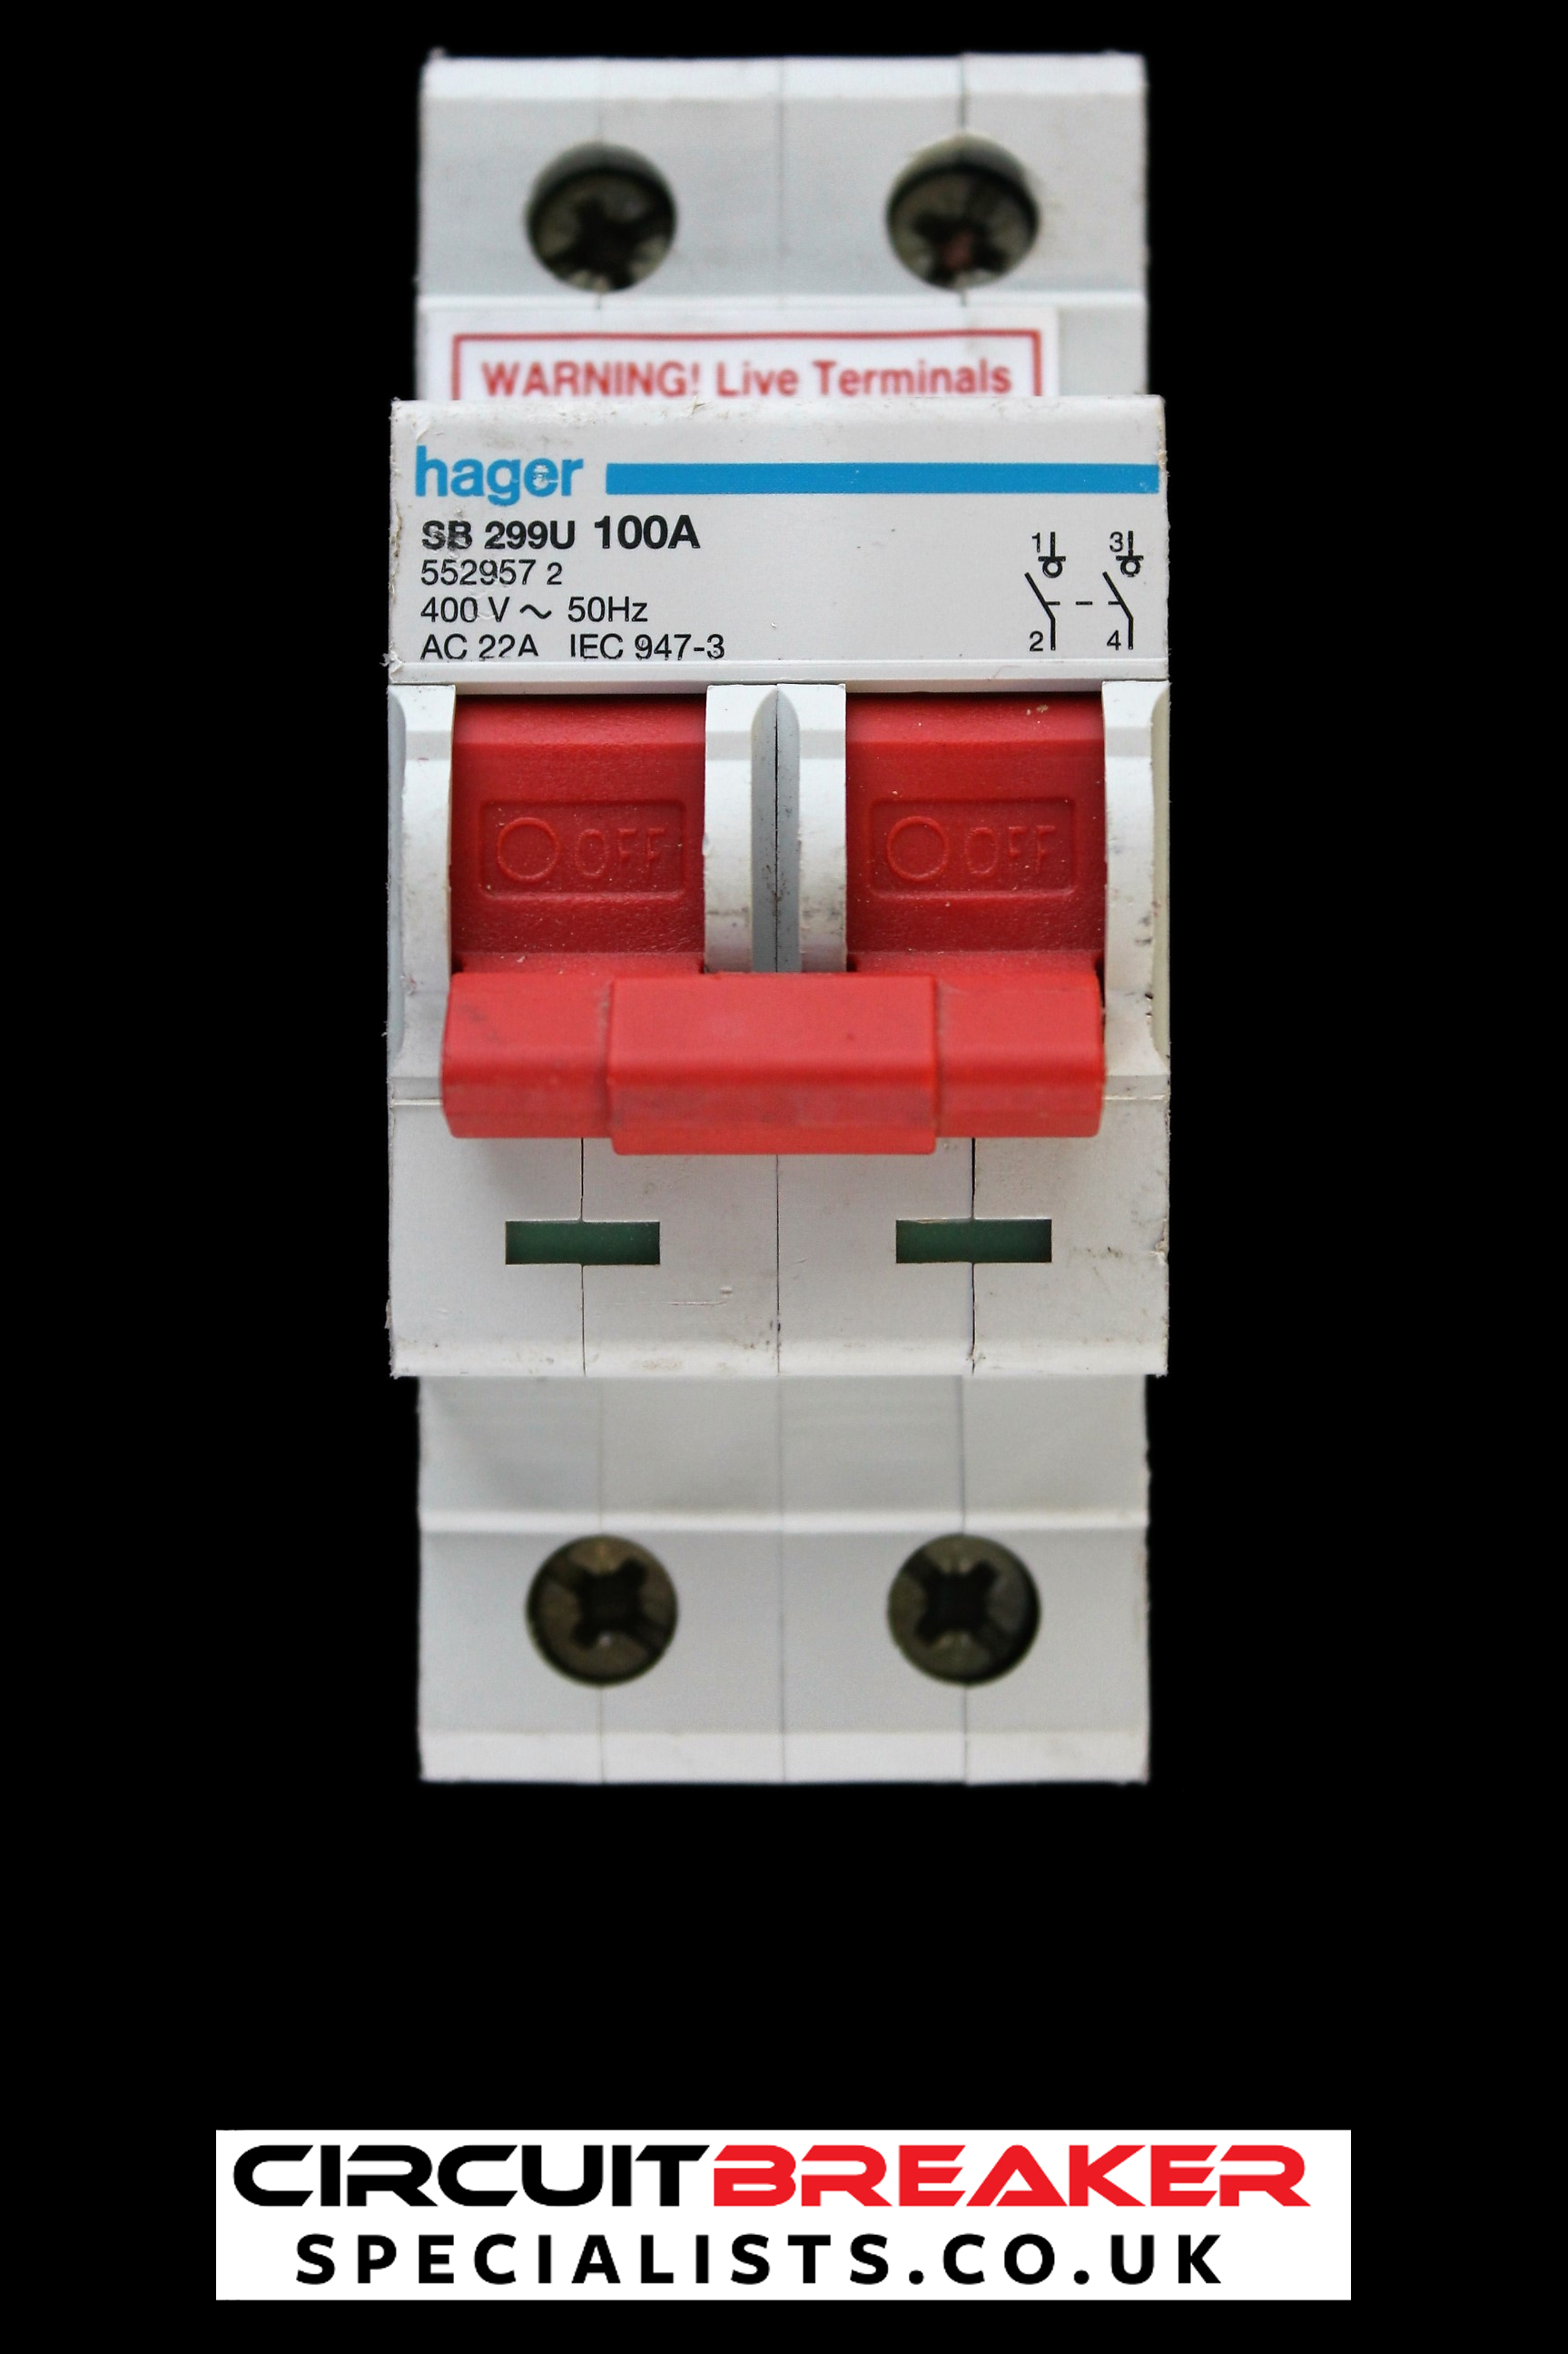 HAGER 100 AMP DOUBLE POLE MAIN SWITCH DISCONNECTOR SB299U 552957